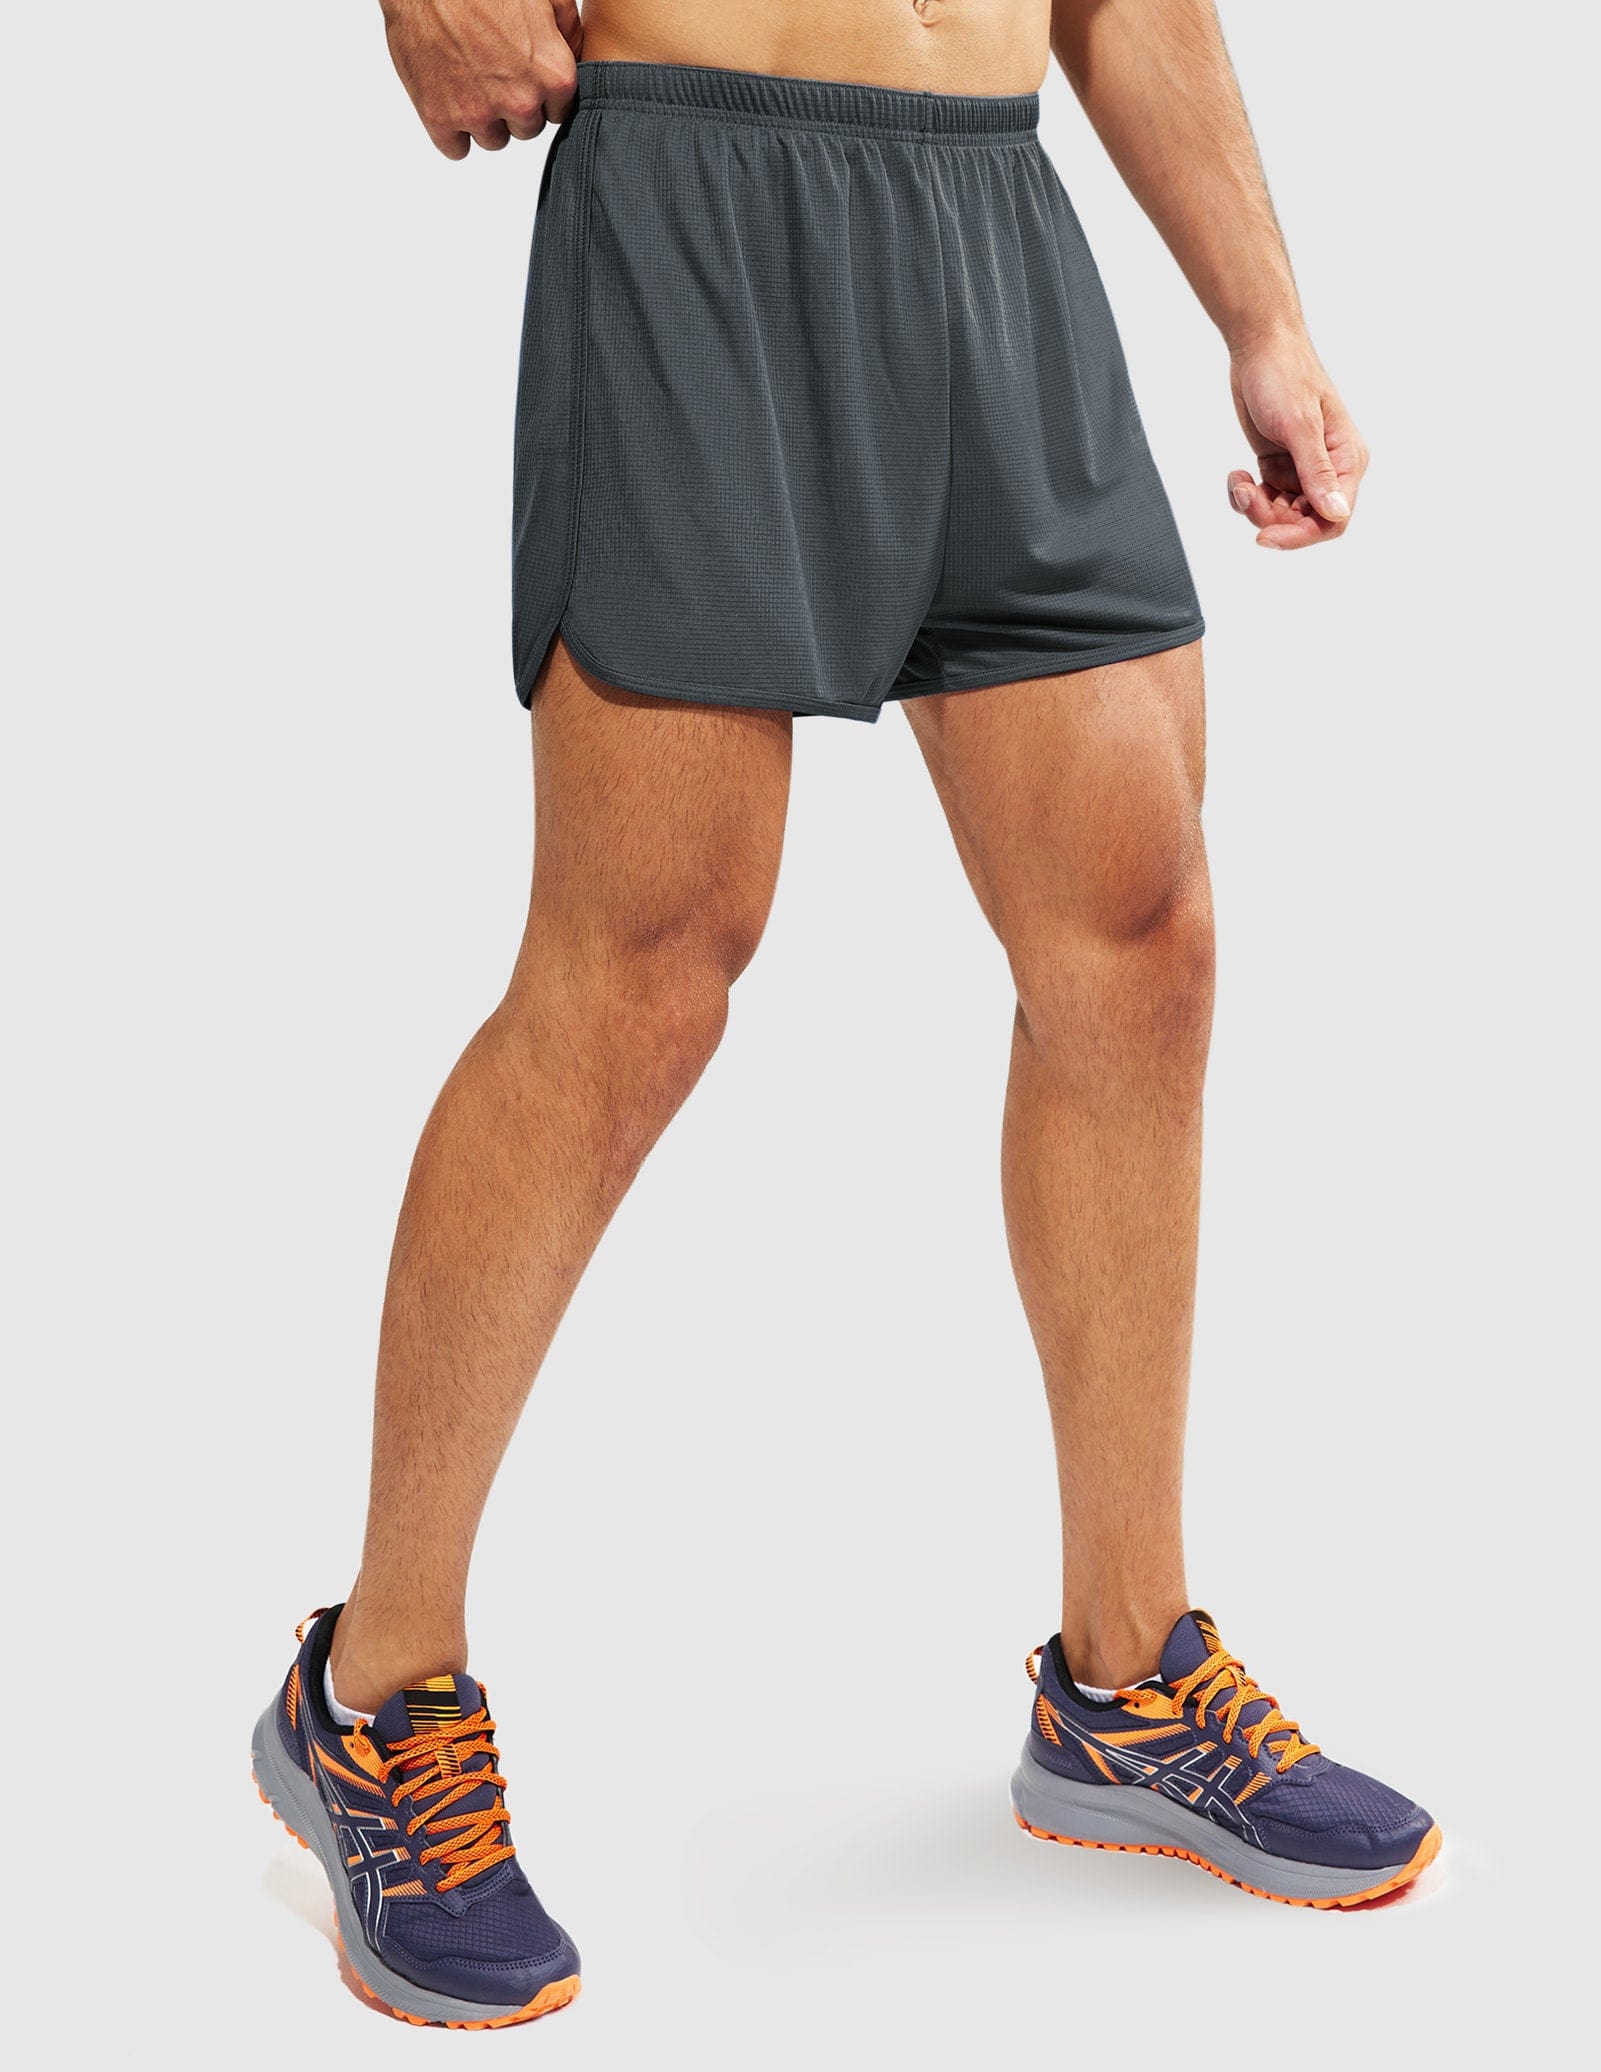 Men's 3-Inch Quick Dry Running Shorts with Liner Men's Shorts Dark Grey / XS MIER